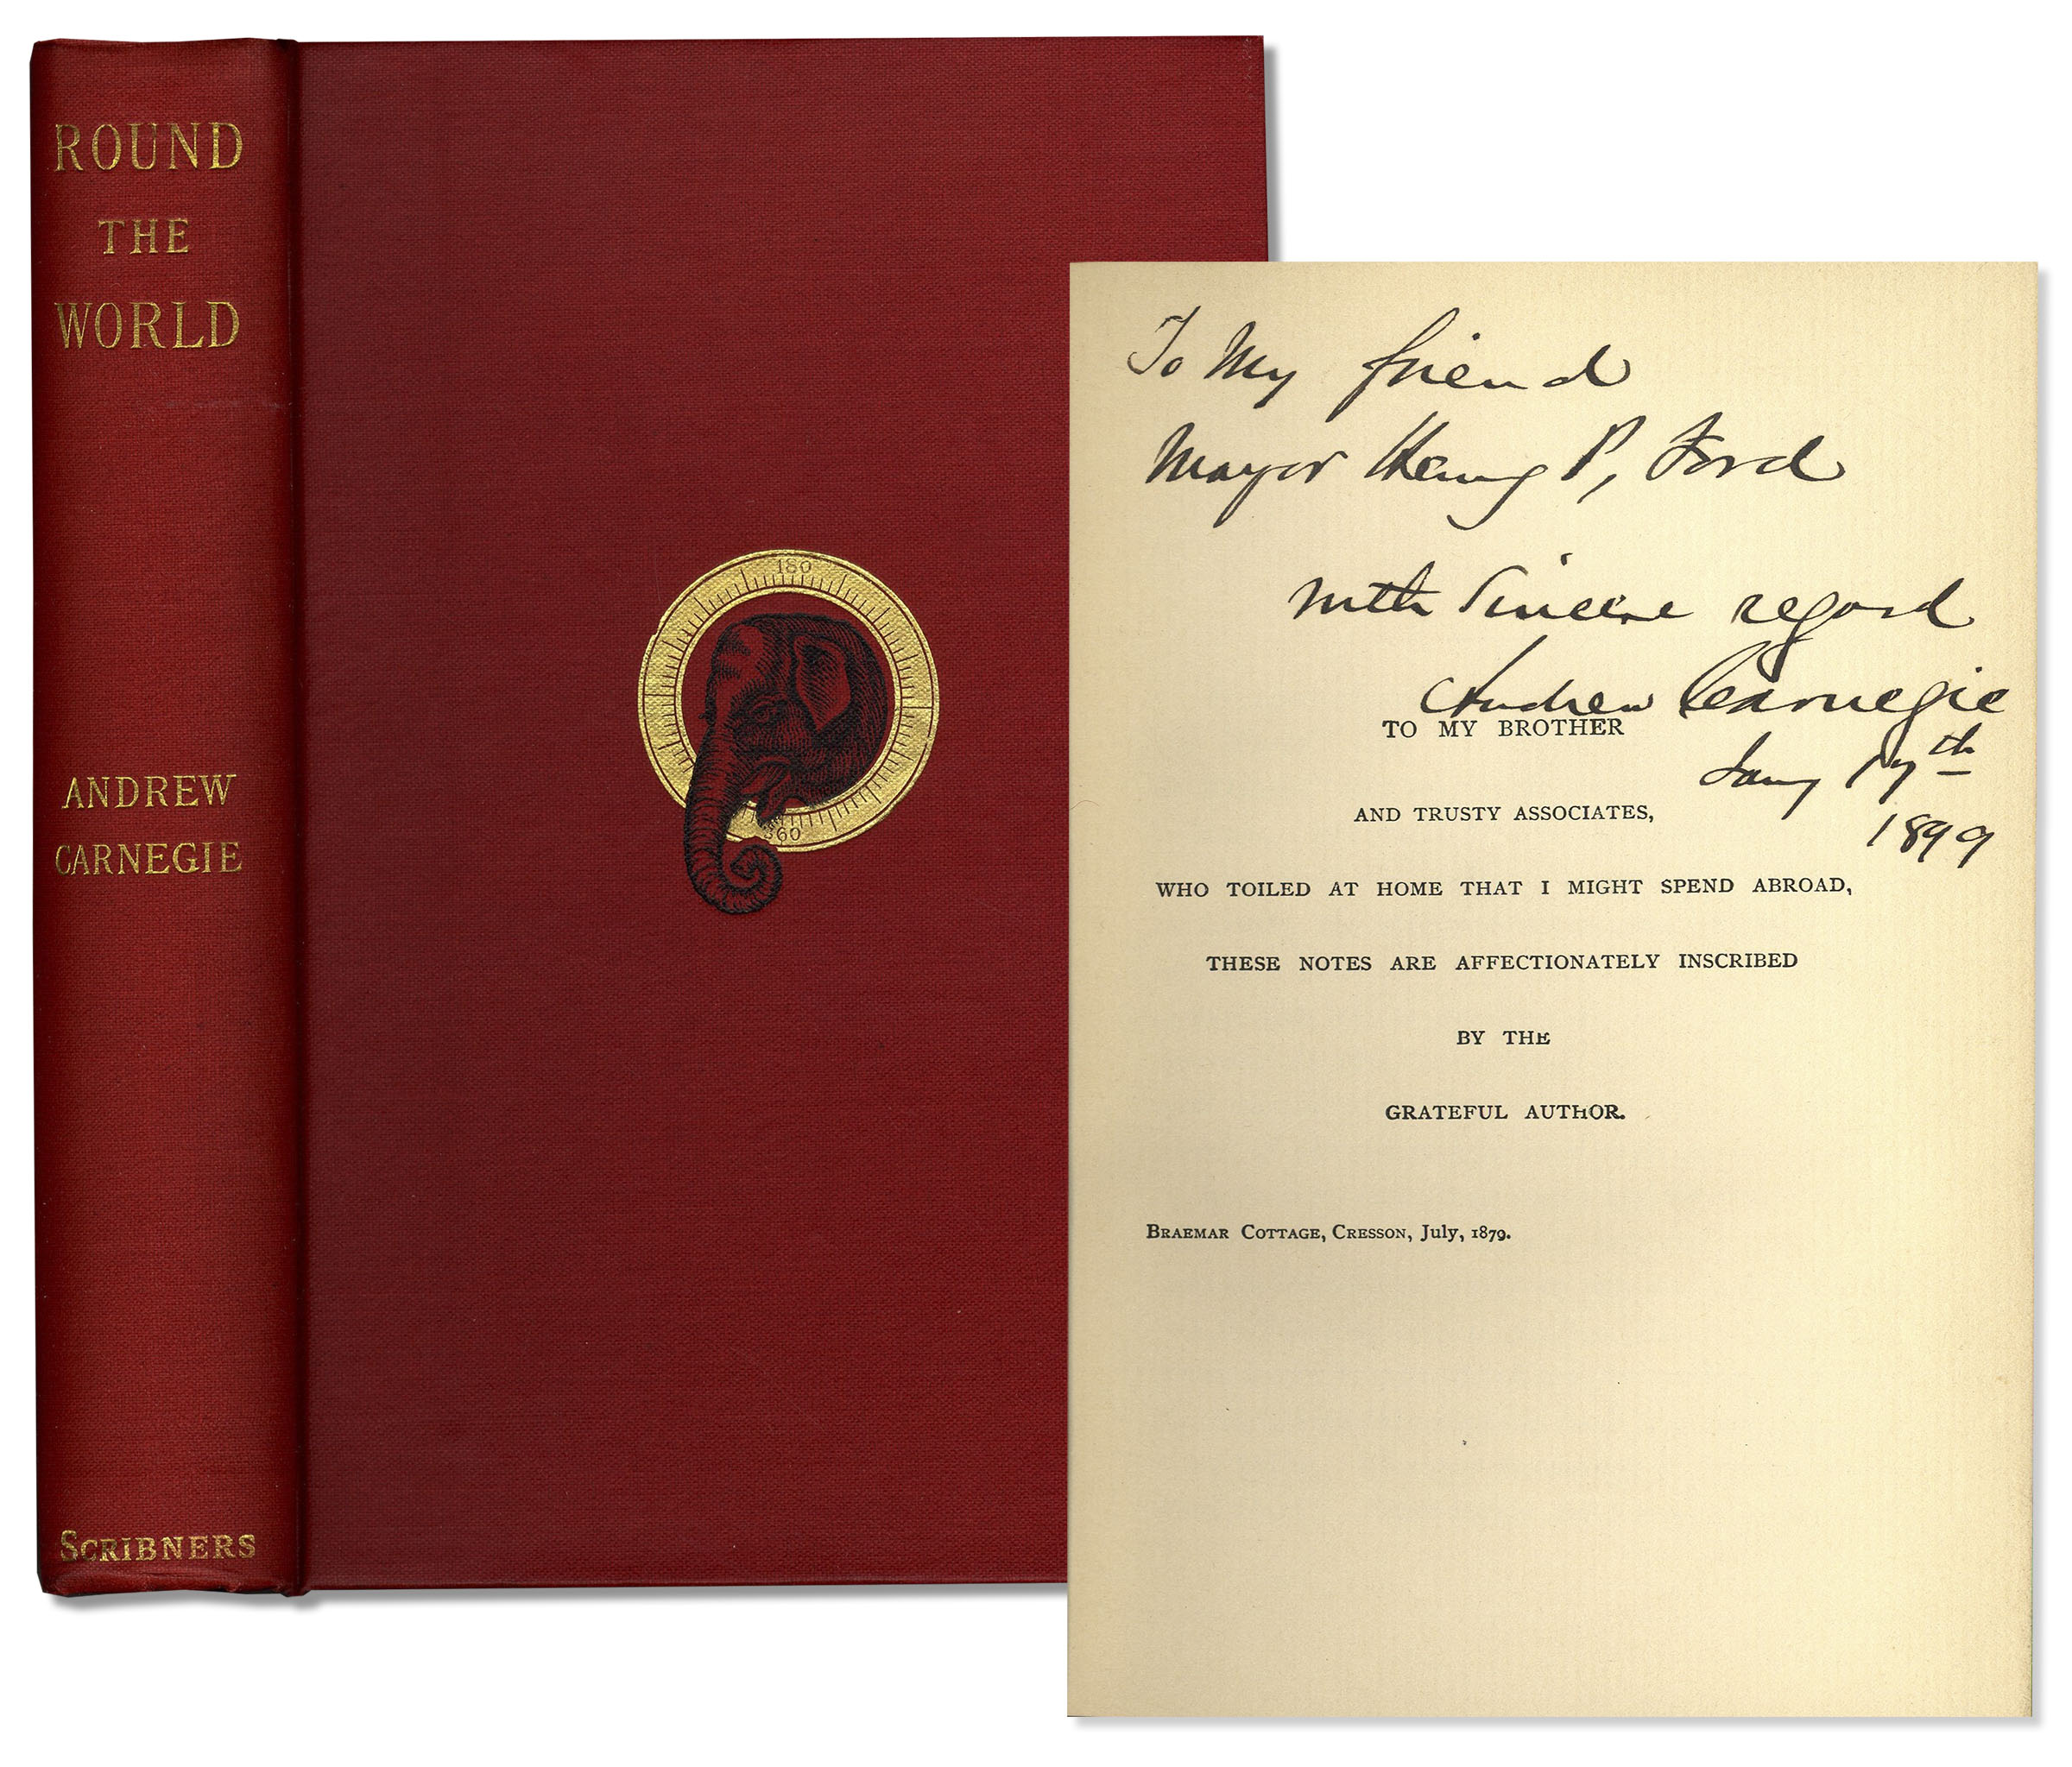 Beautiful Andrew Carnegie signed copy of his travel log ''Round The World'', published by Charles